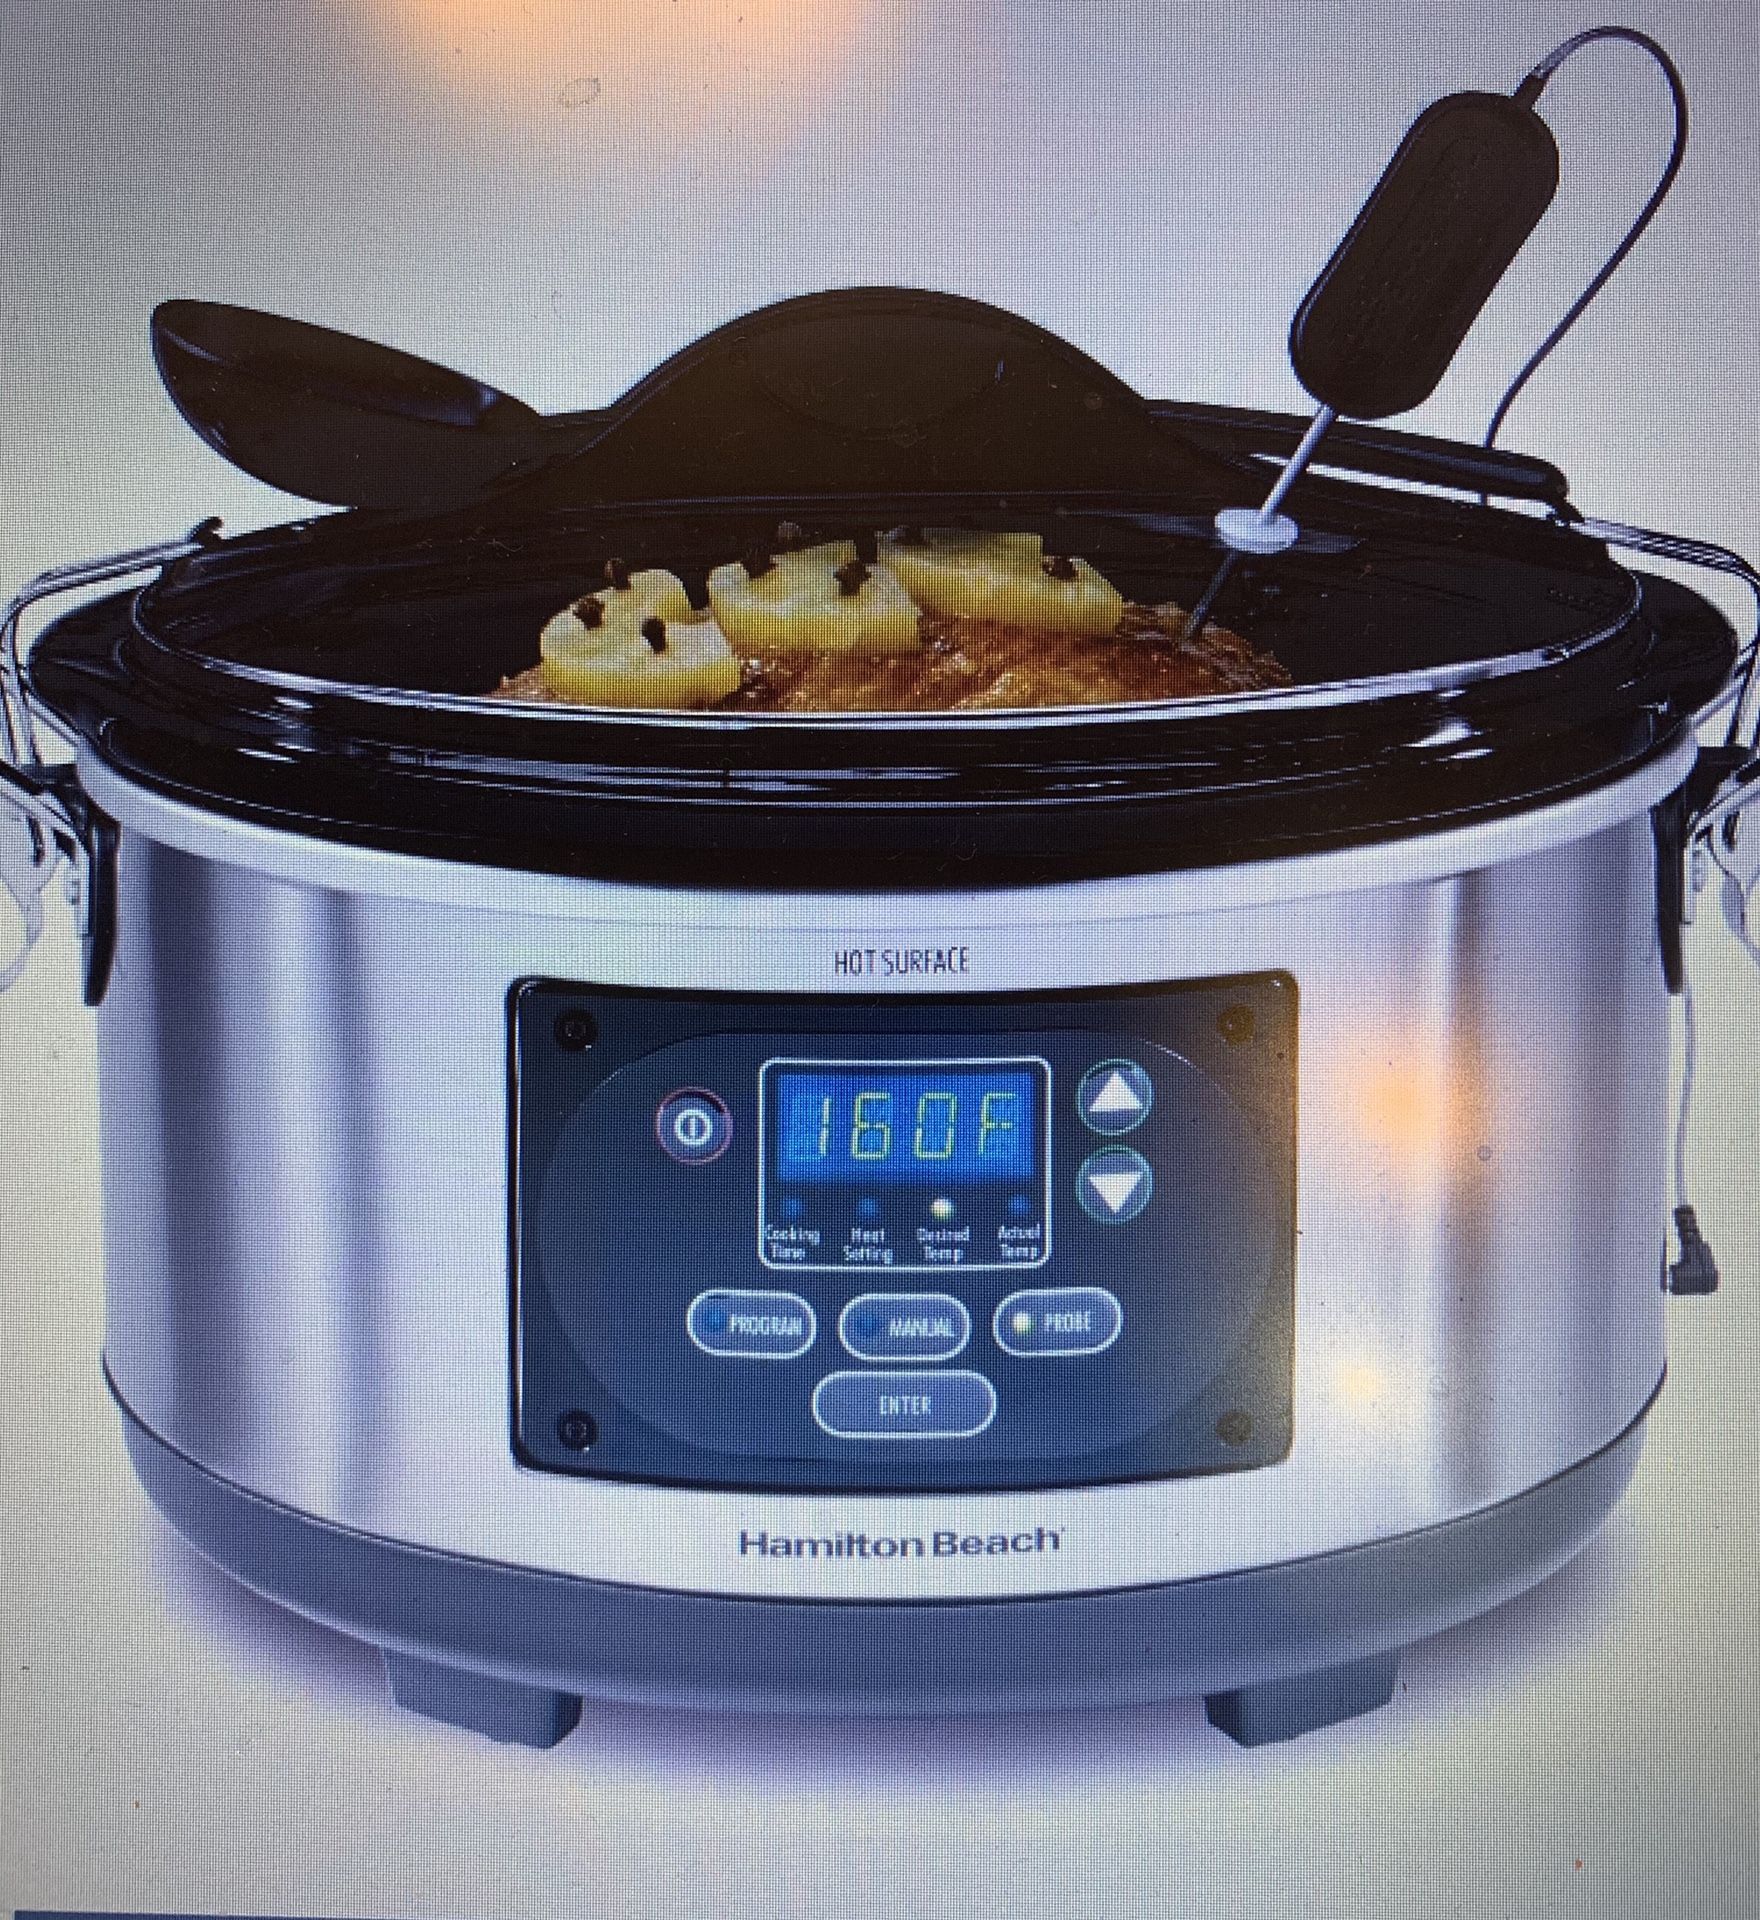 Hamilton Beach Slow Cooker w/thermometer- Never Used, Still in Box